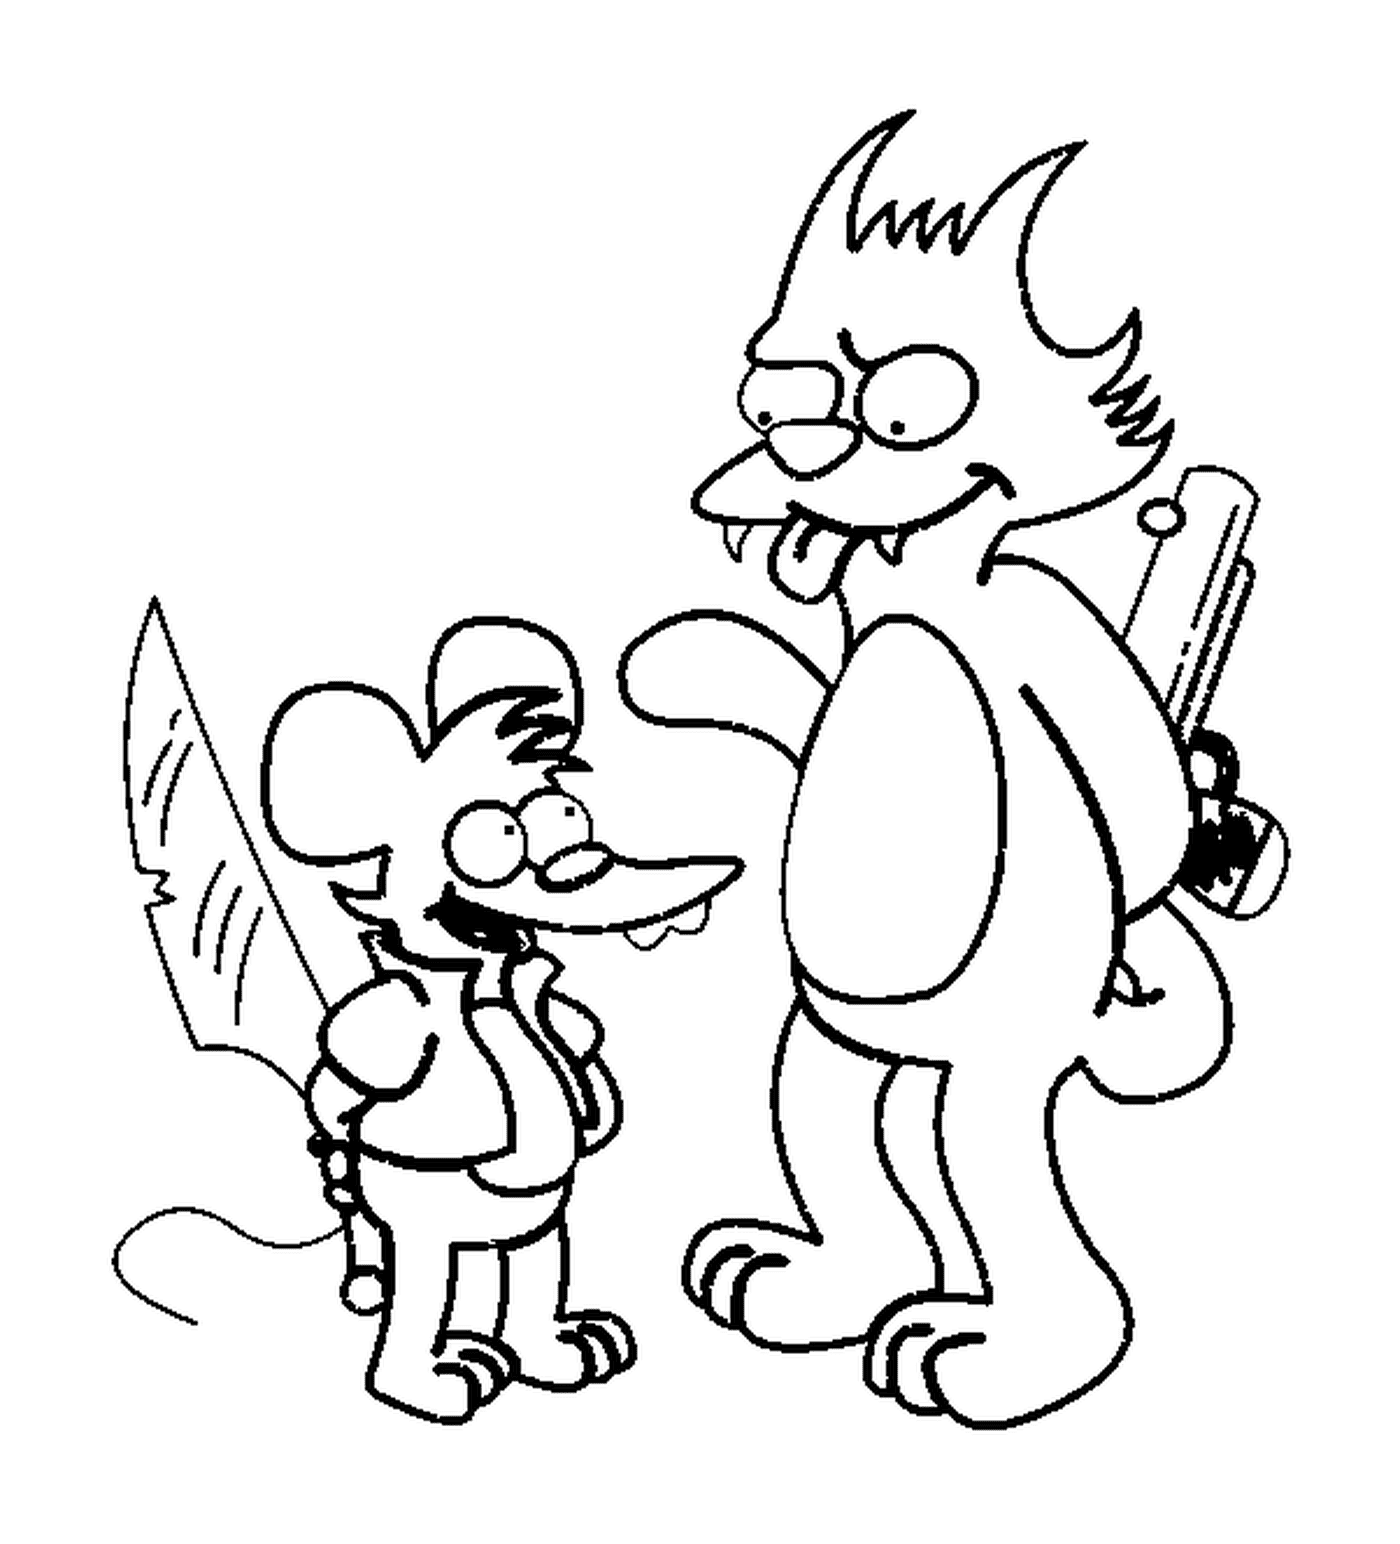  Itchy y Scratchy Simpson 